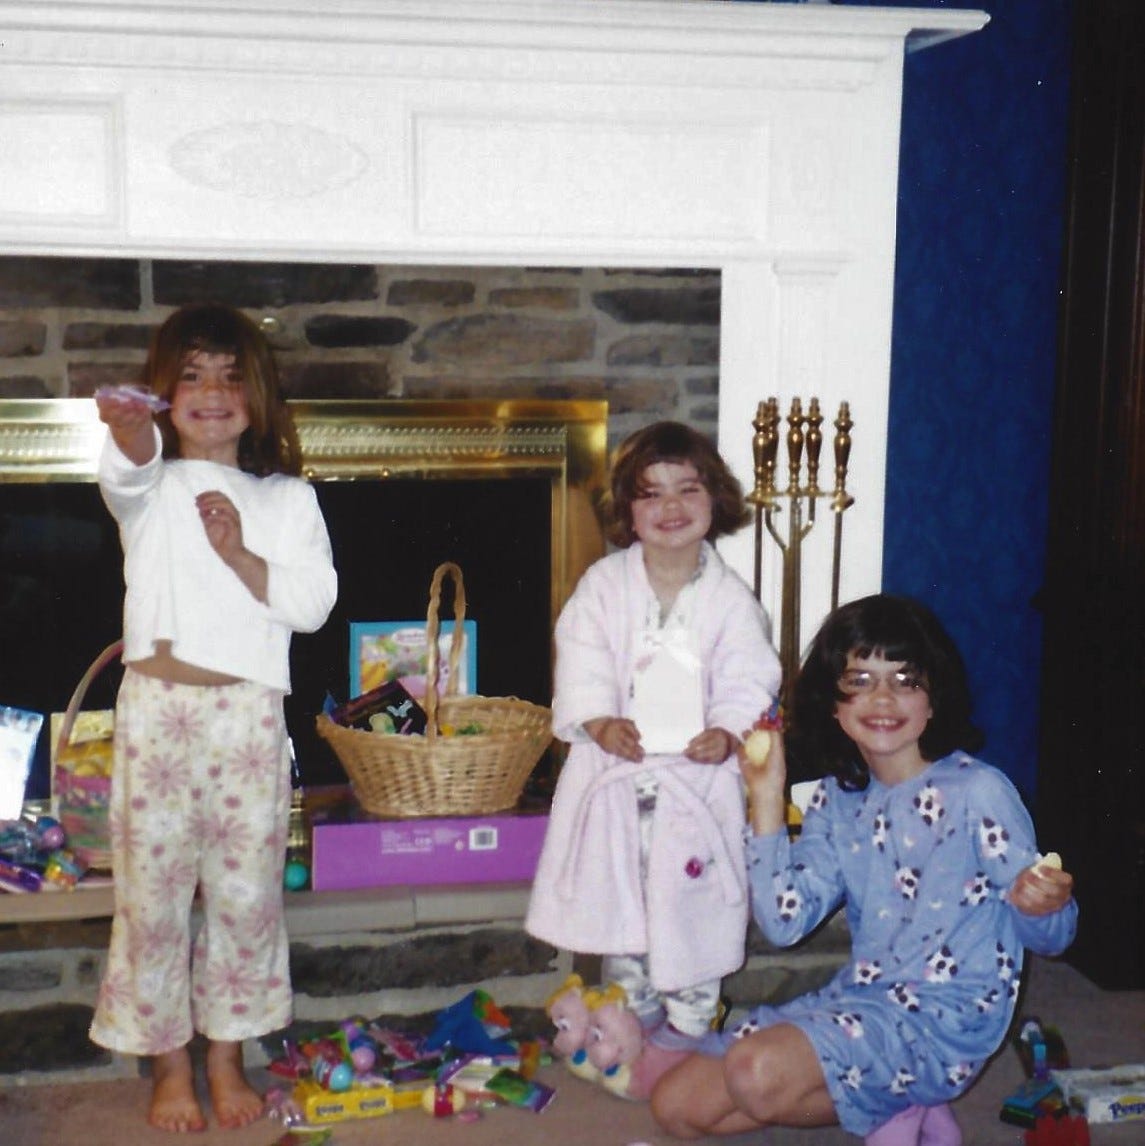 Three little girls in pajamas  delightedly show off what the Easter Bunny left in their baskets